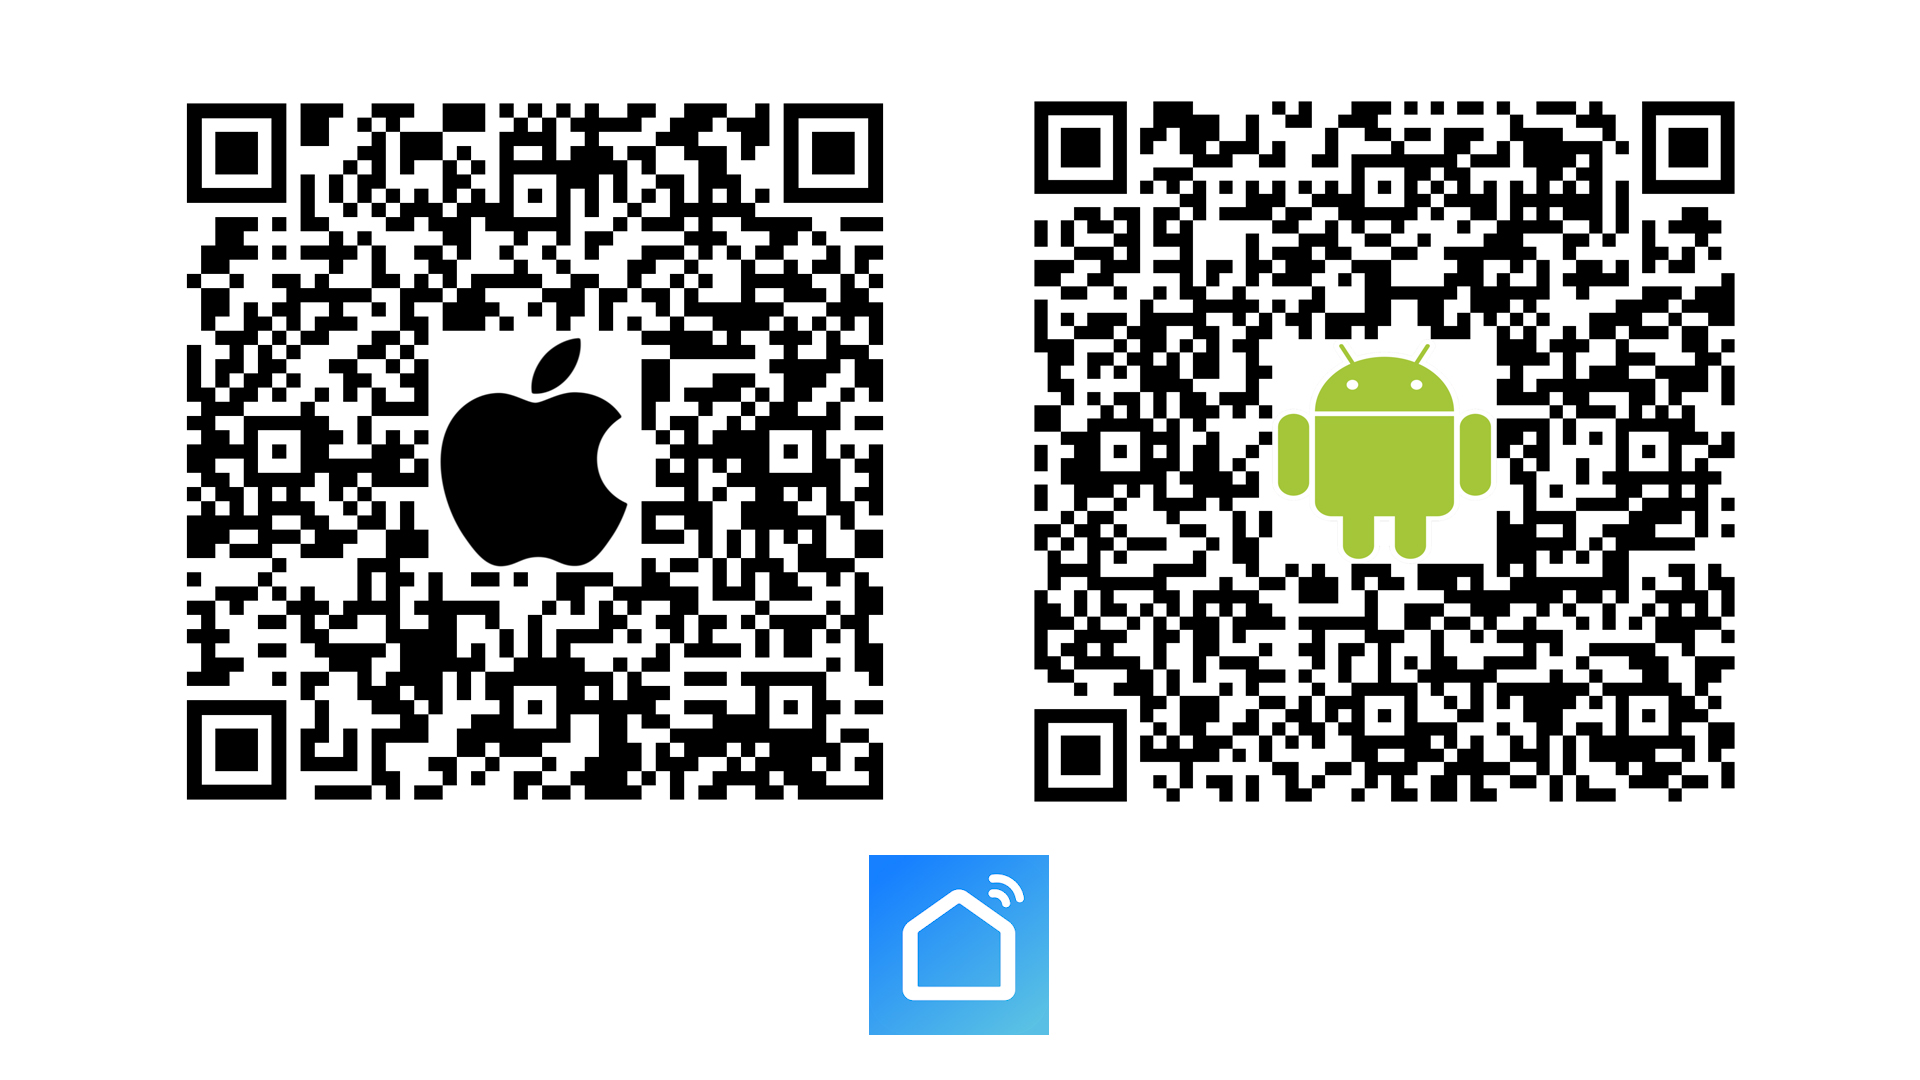 QR Codes for the Smart Life app